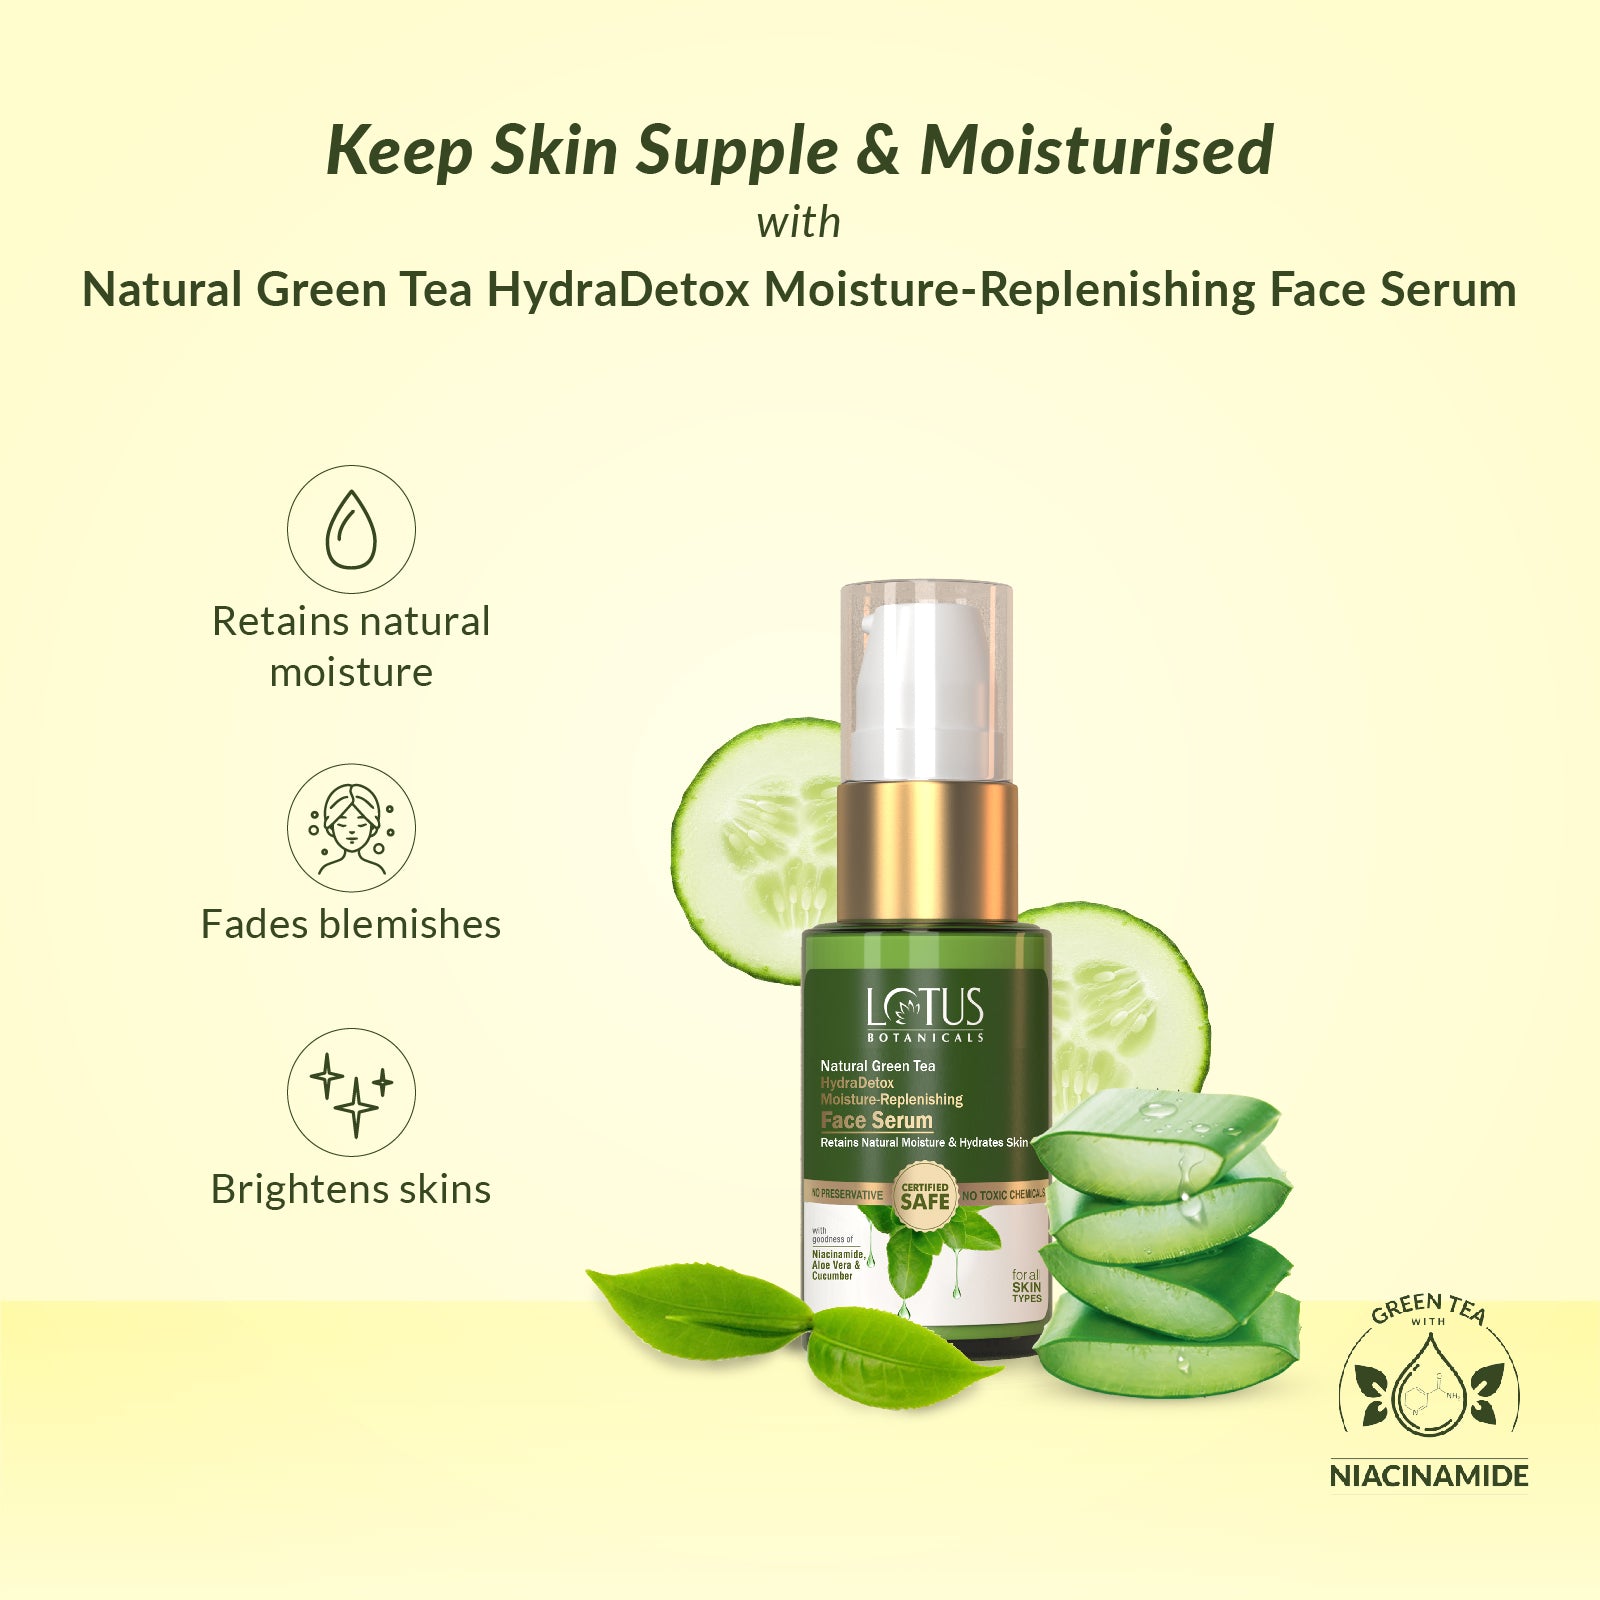 HydraDetox Moisture-Replenishing Face Serum with Natural Green Tea Extract